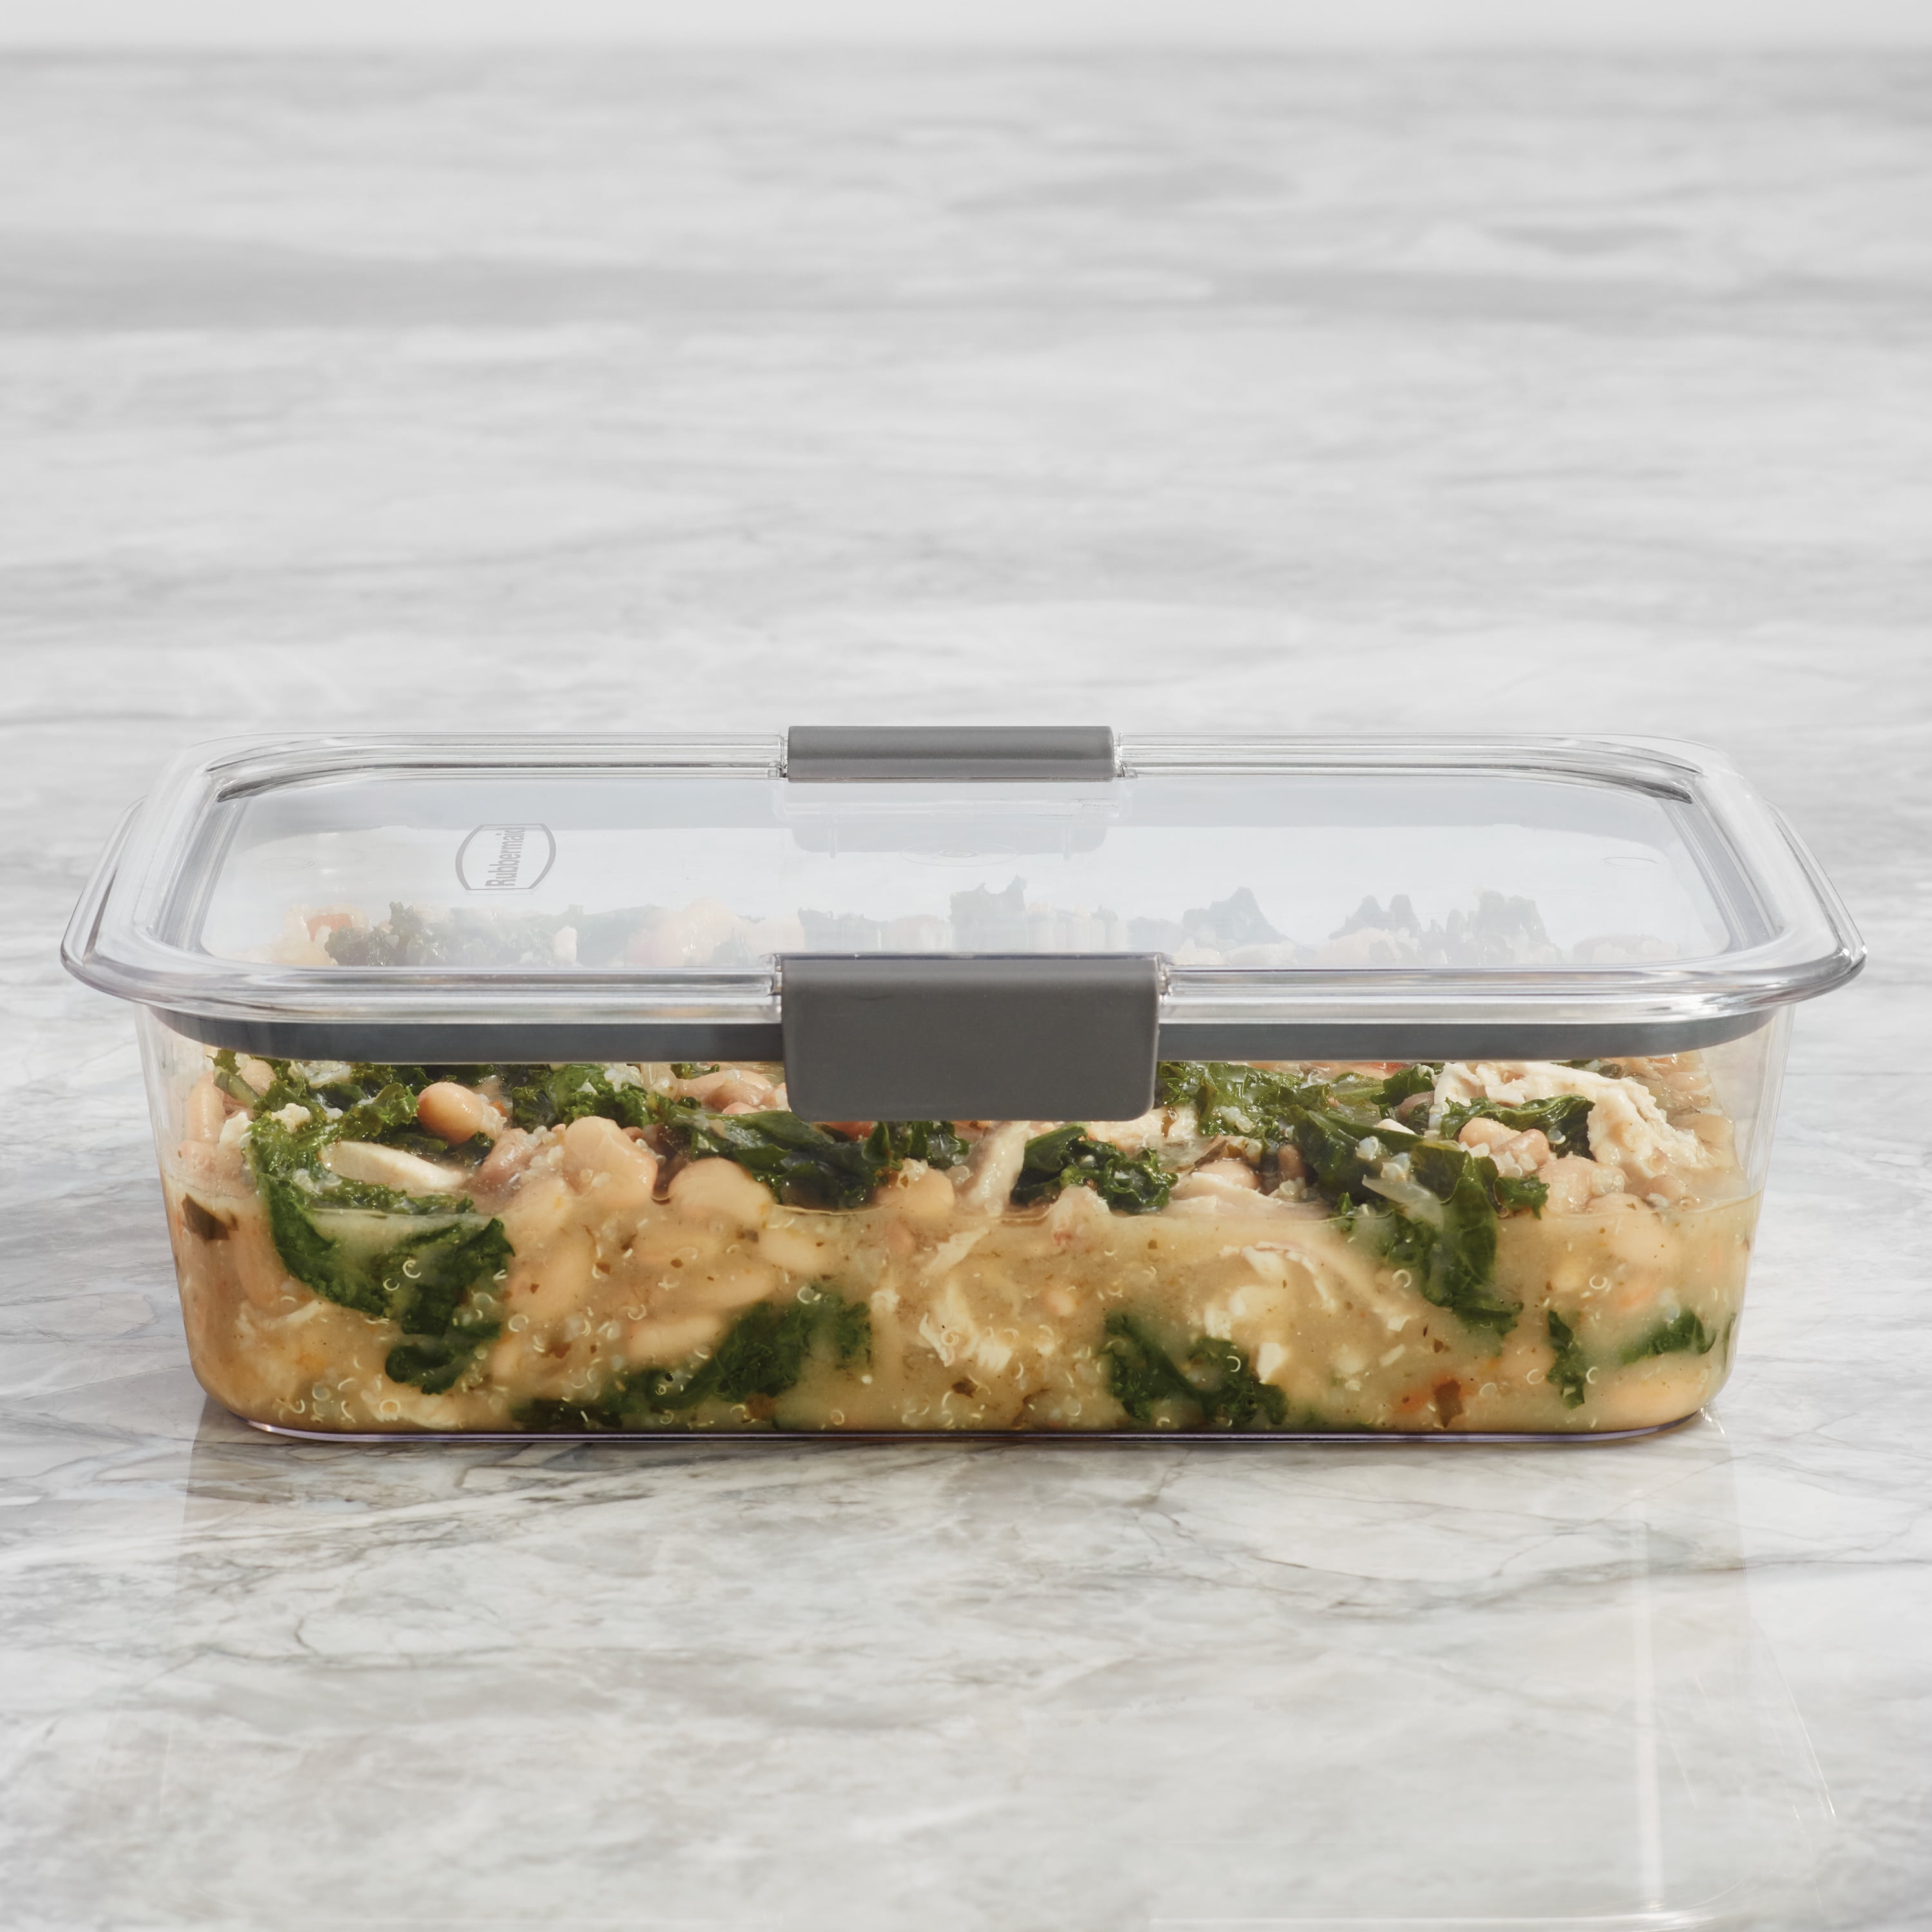  Rubbermaid Brilliance Glass Storage 4.7-Cup Food Containers  with Lids, Clear (Pack of 3) & Brilliance Food Storage Container, Large,  9.6 Cup, Clear 2024351